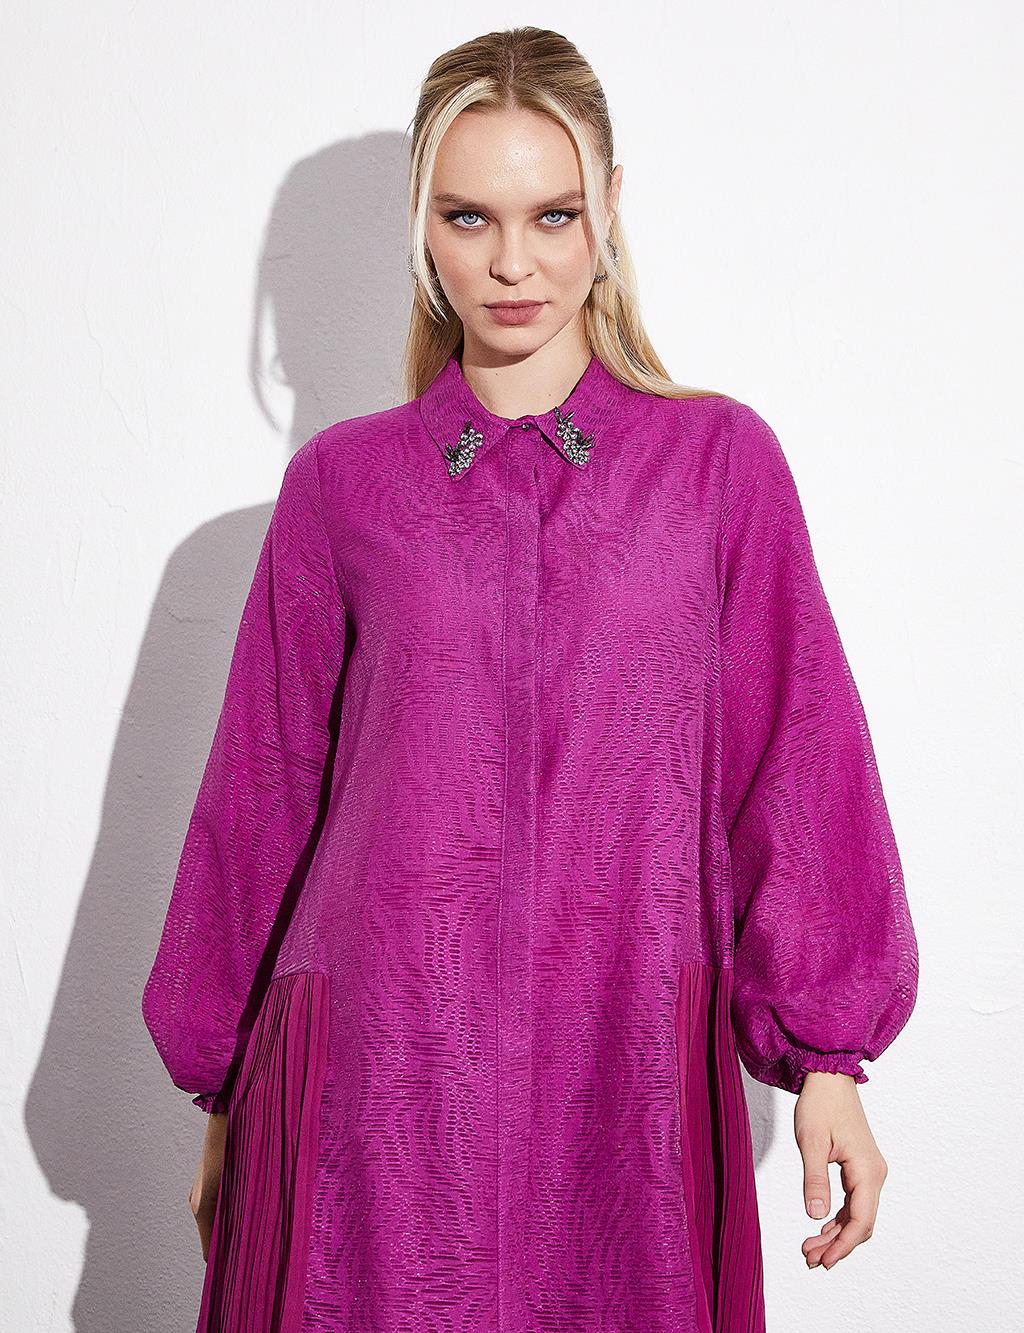 Abstract Patterned Pleated Tunic Purple